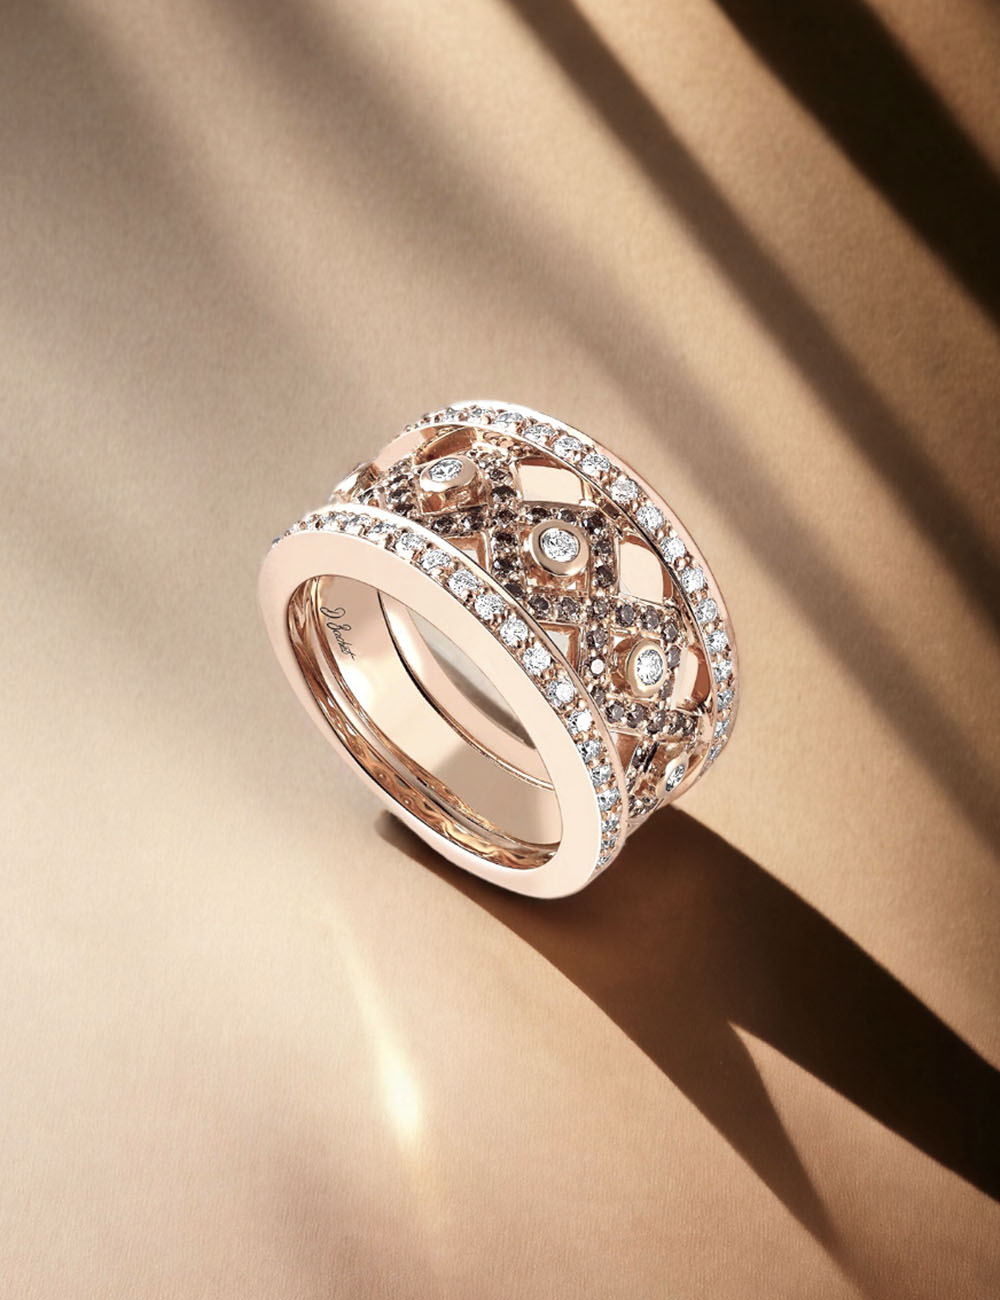 Feminine Rock ring in rose gold with white and brown diamonds, elegant and modern design.